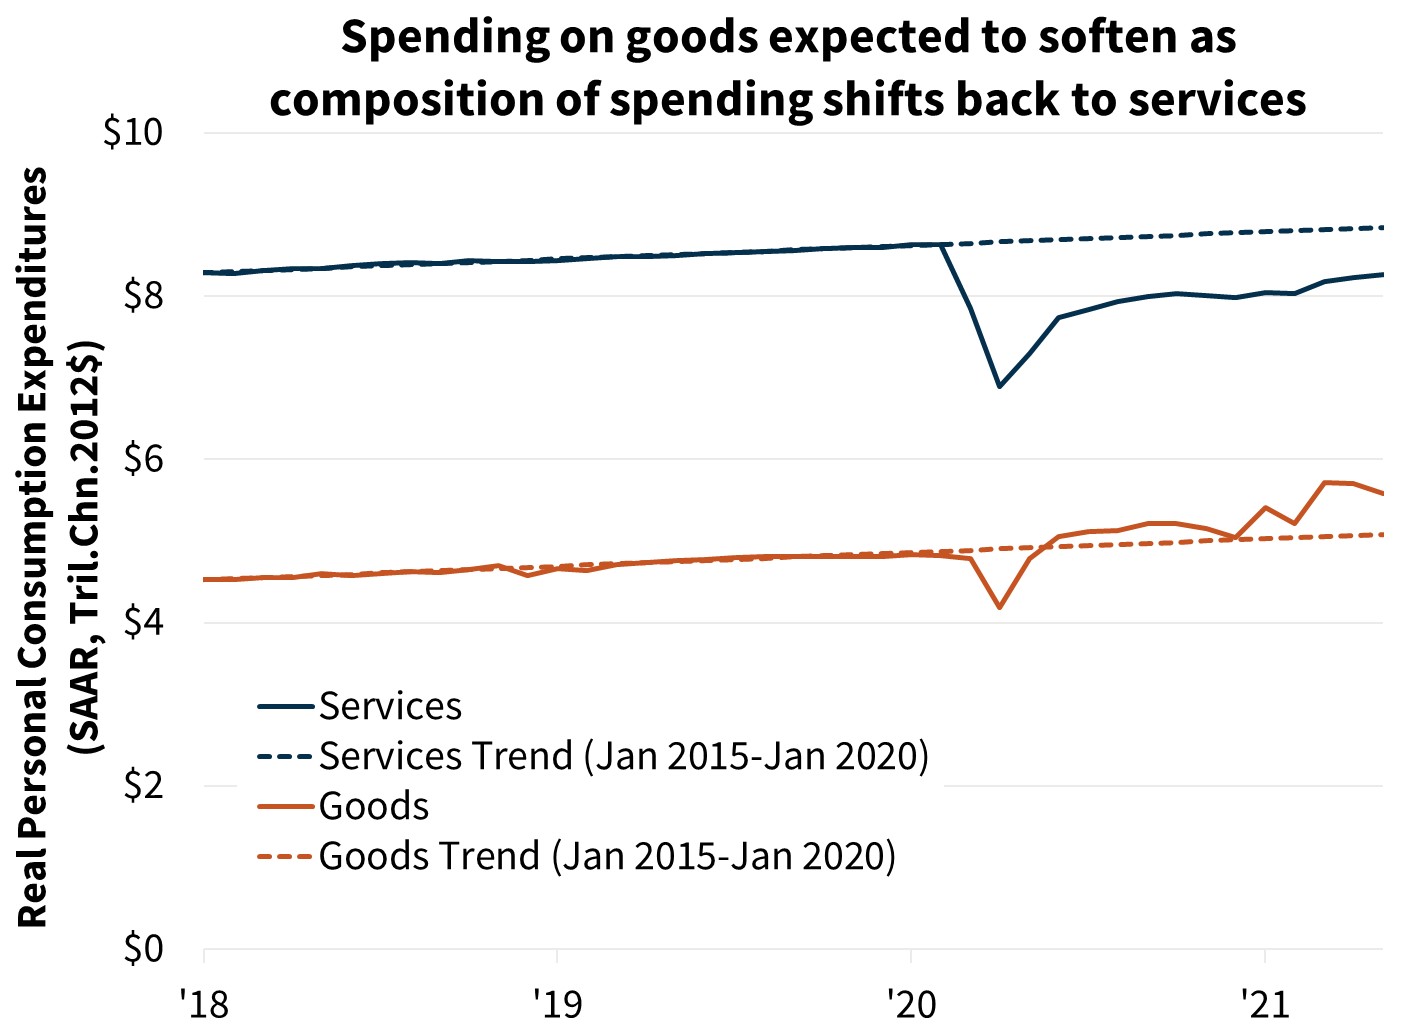  Spending on goods expected to soften as composition of spending shifts back to services 